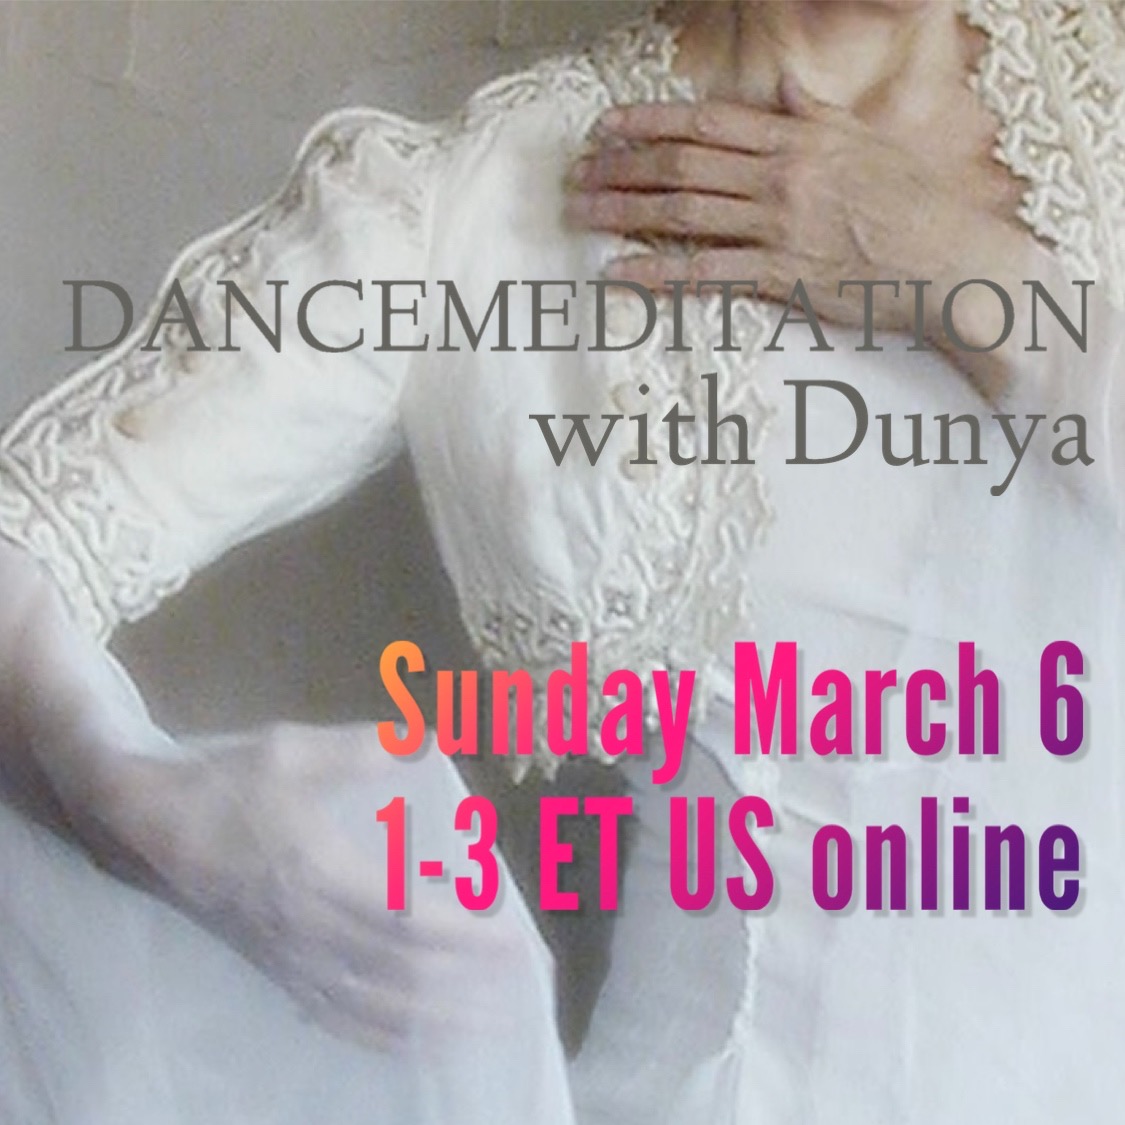 Live Online ~ Sunday March 6